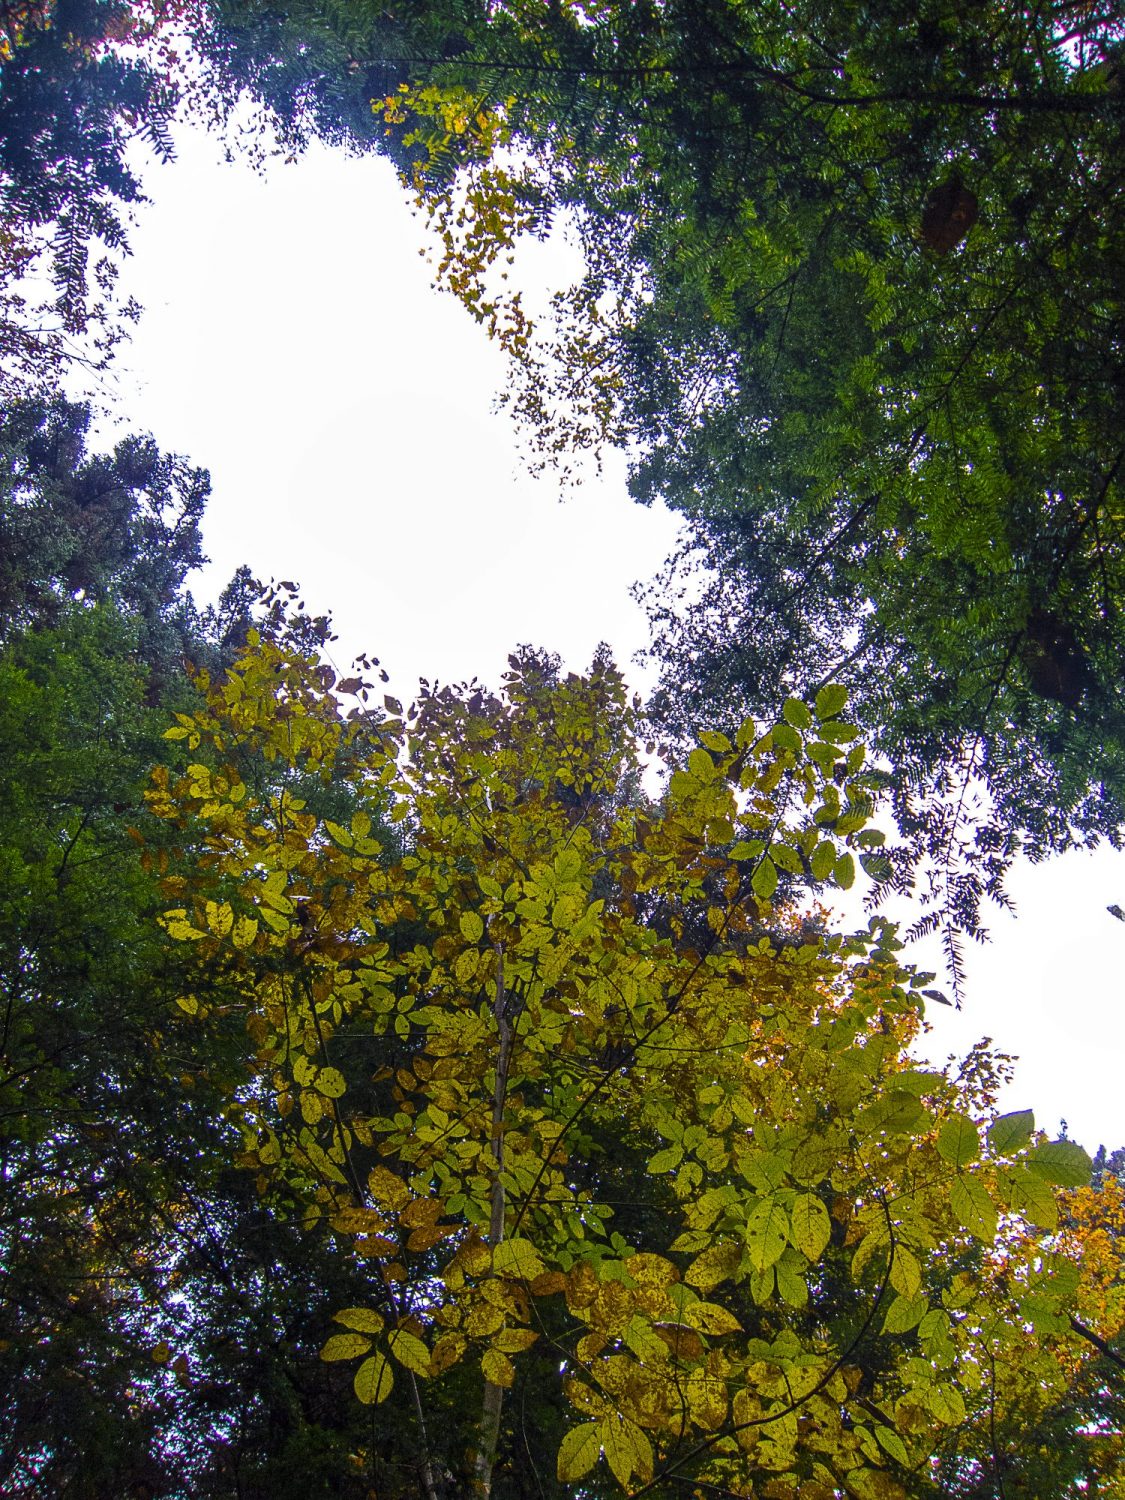 Looking up at Sky Between Trees with Green Leaves